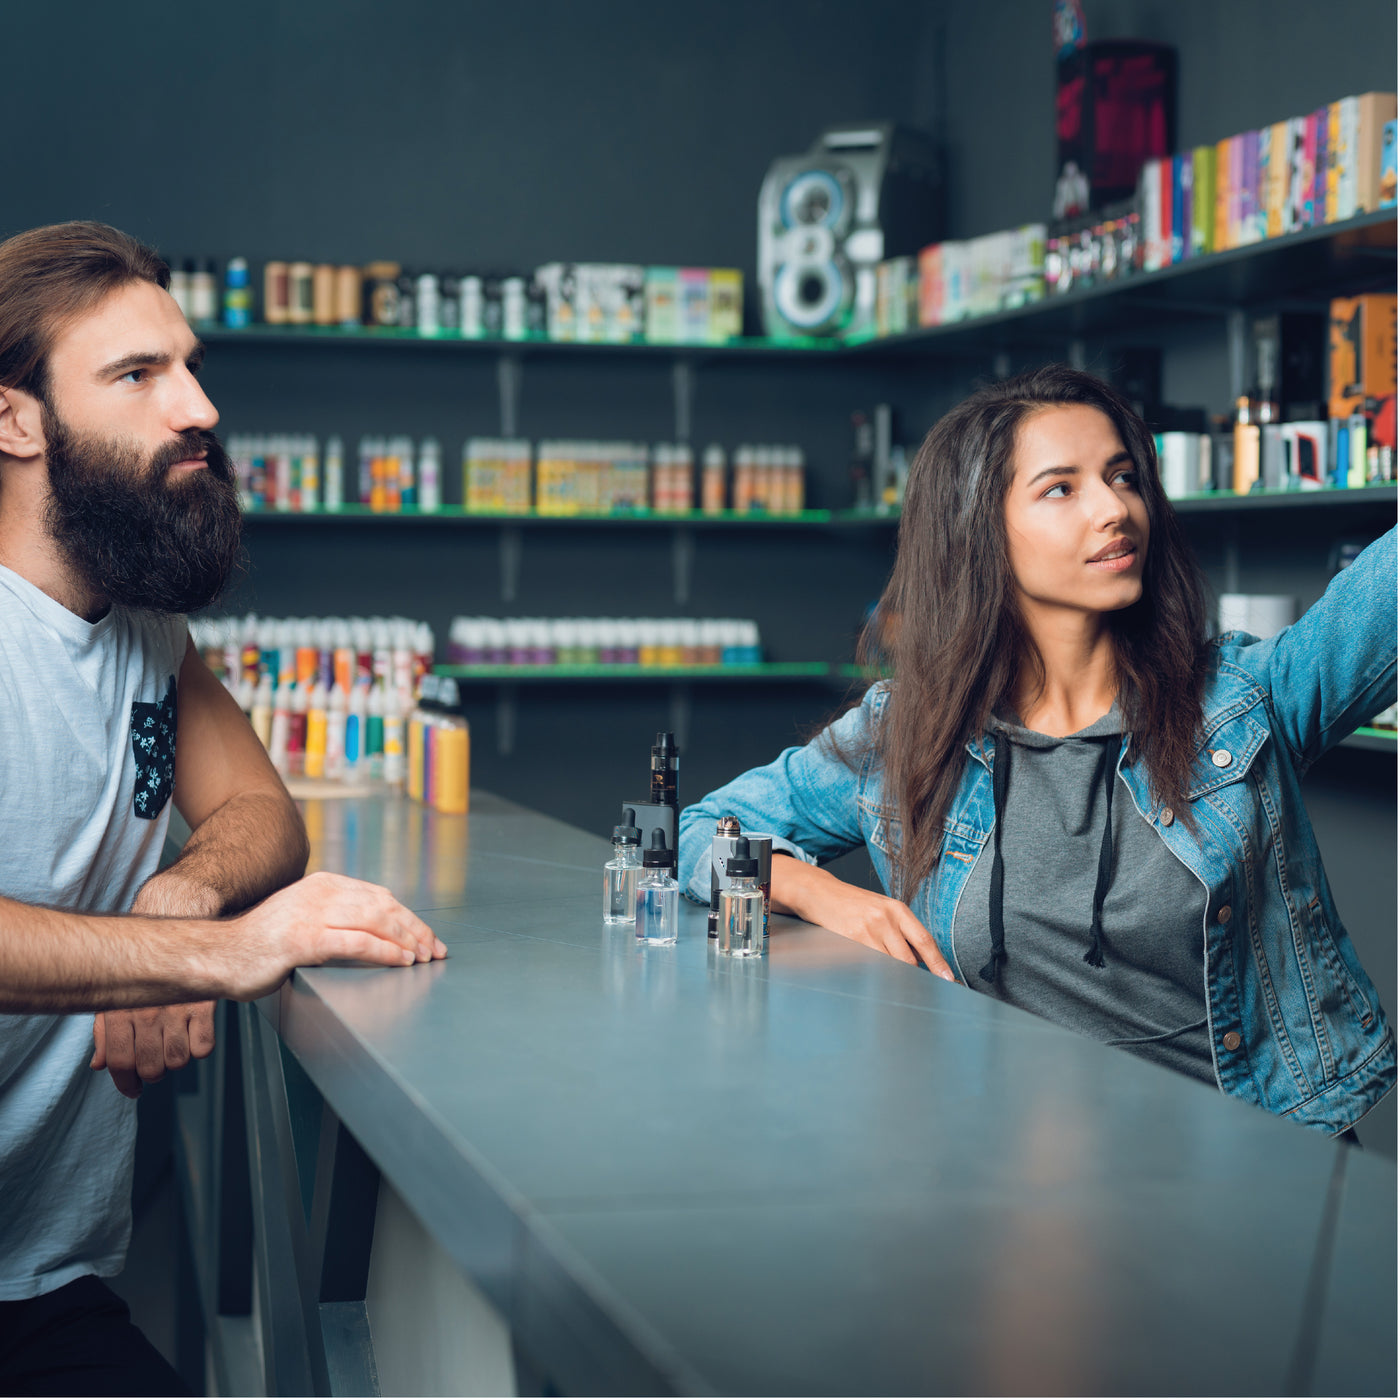 OPENING A VAPE STORE: ARE YOU THINKING OF OPENING A VAPE SHOP? SOME THINGS TO CONSIDER...